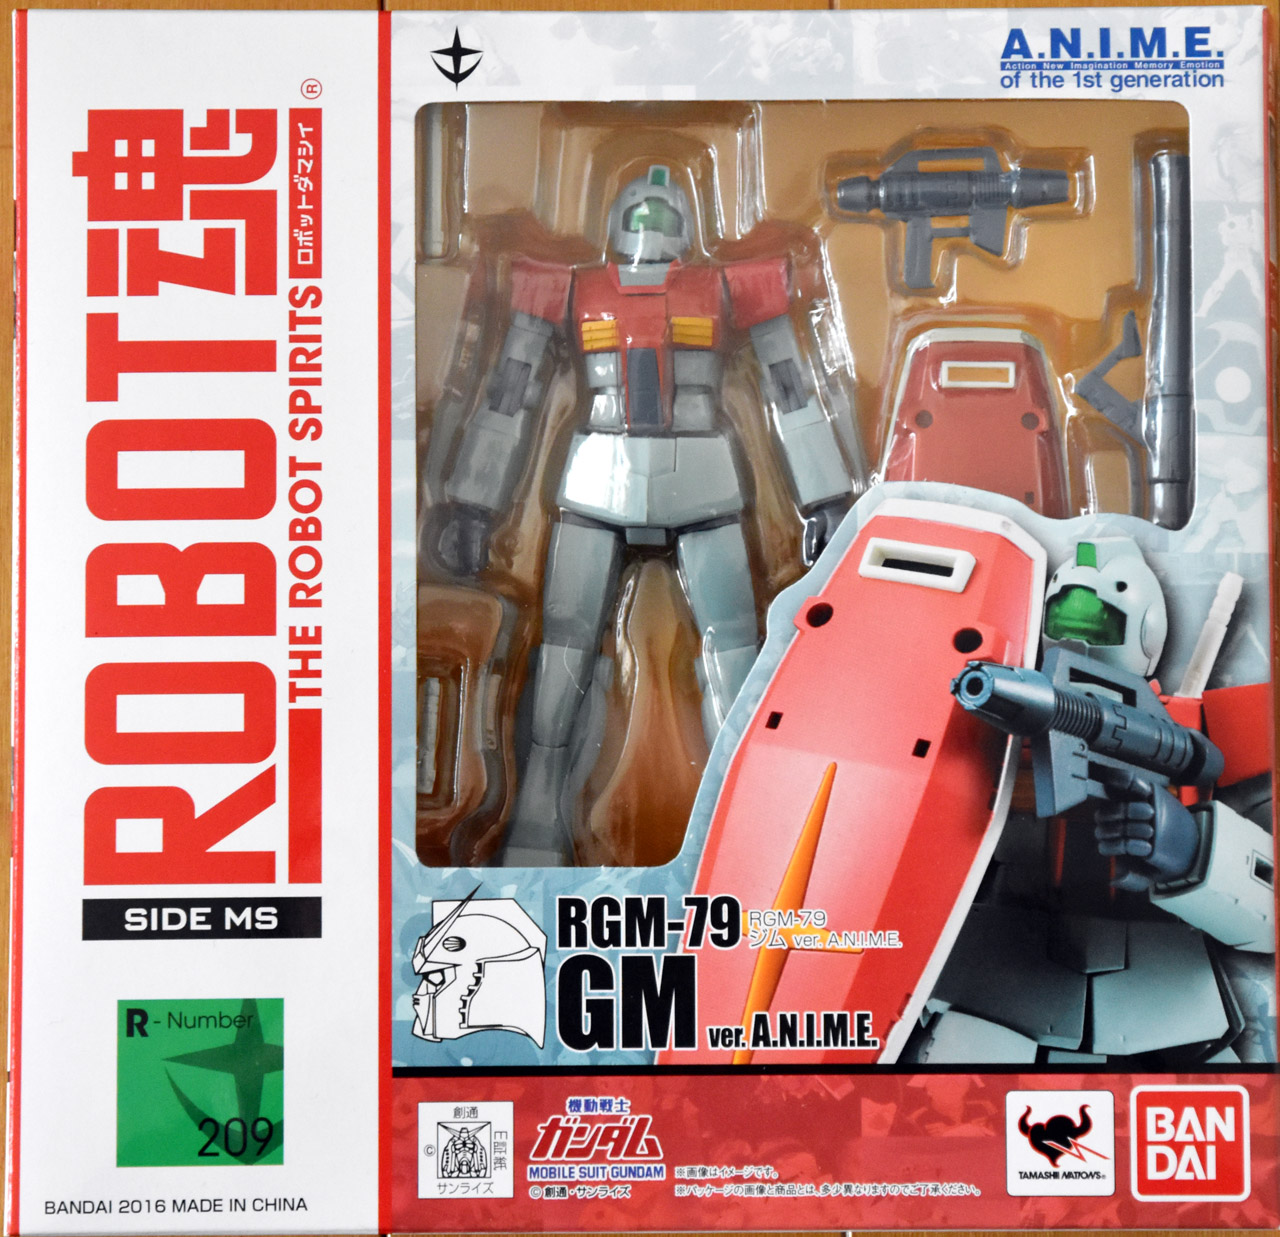 Robot GM ver. A.N.I.M.E. by Bandai (Part 1: Unbox) - hobbylink.tv